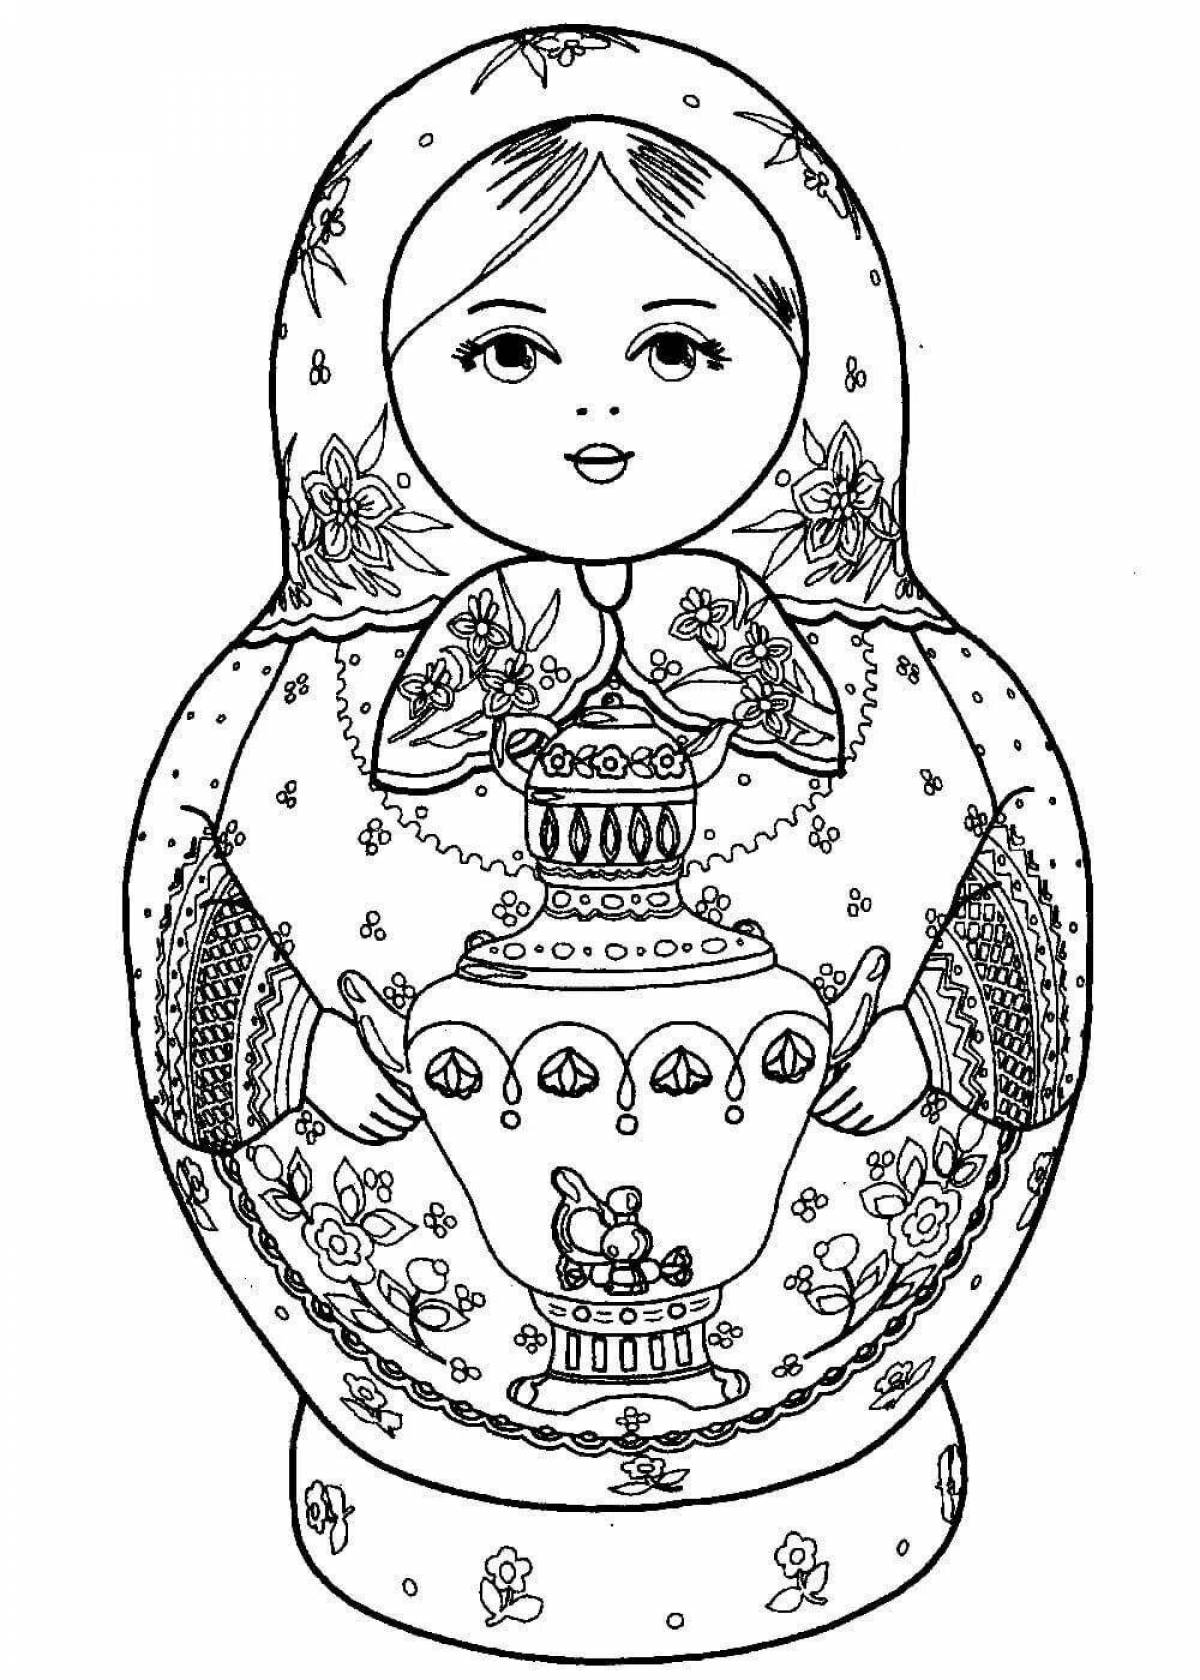 Russian doll with colored splashes